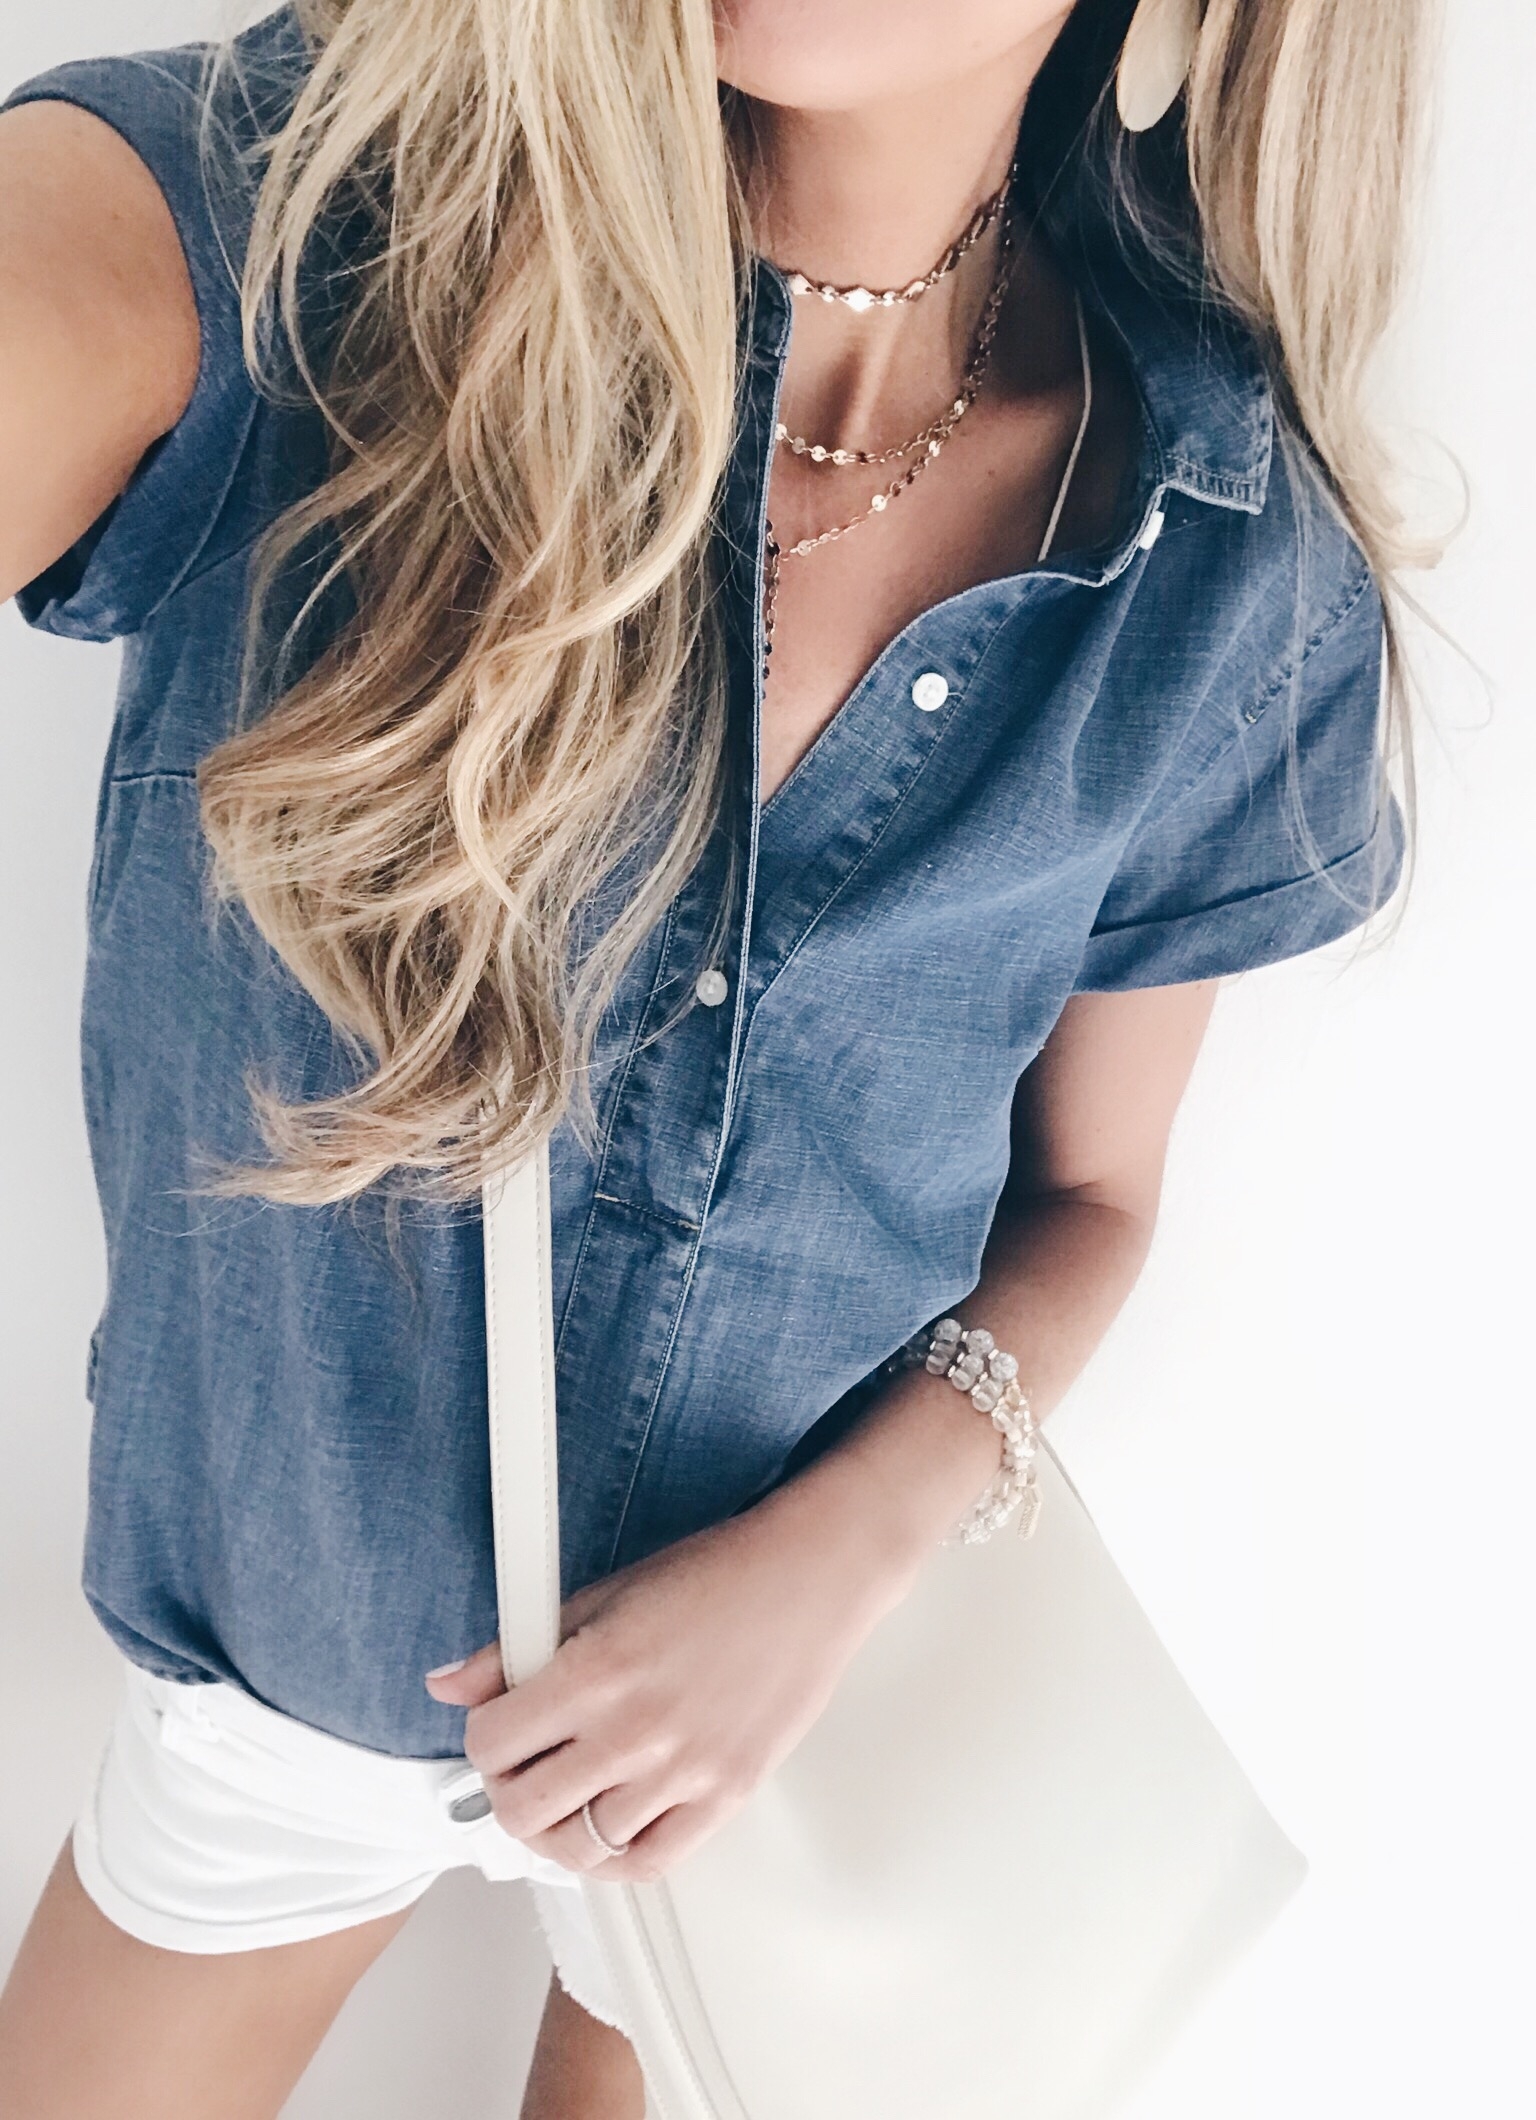 connecticut fashion blogger rachel moore in chambray top and denim shorts